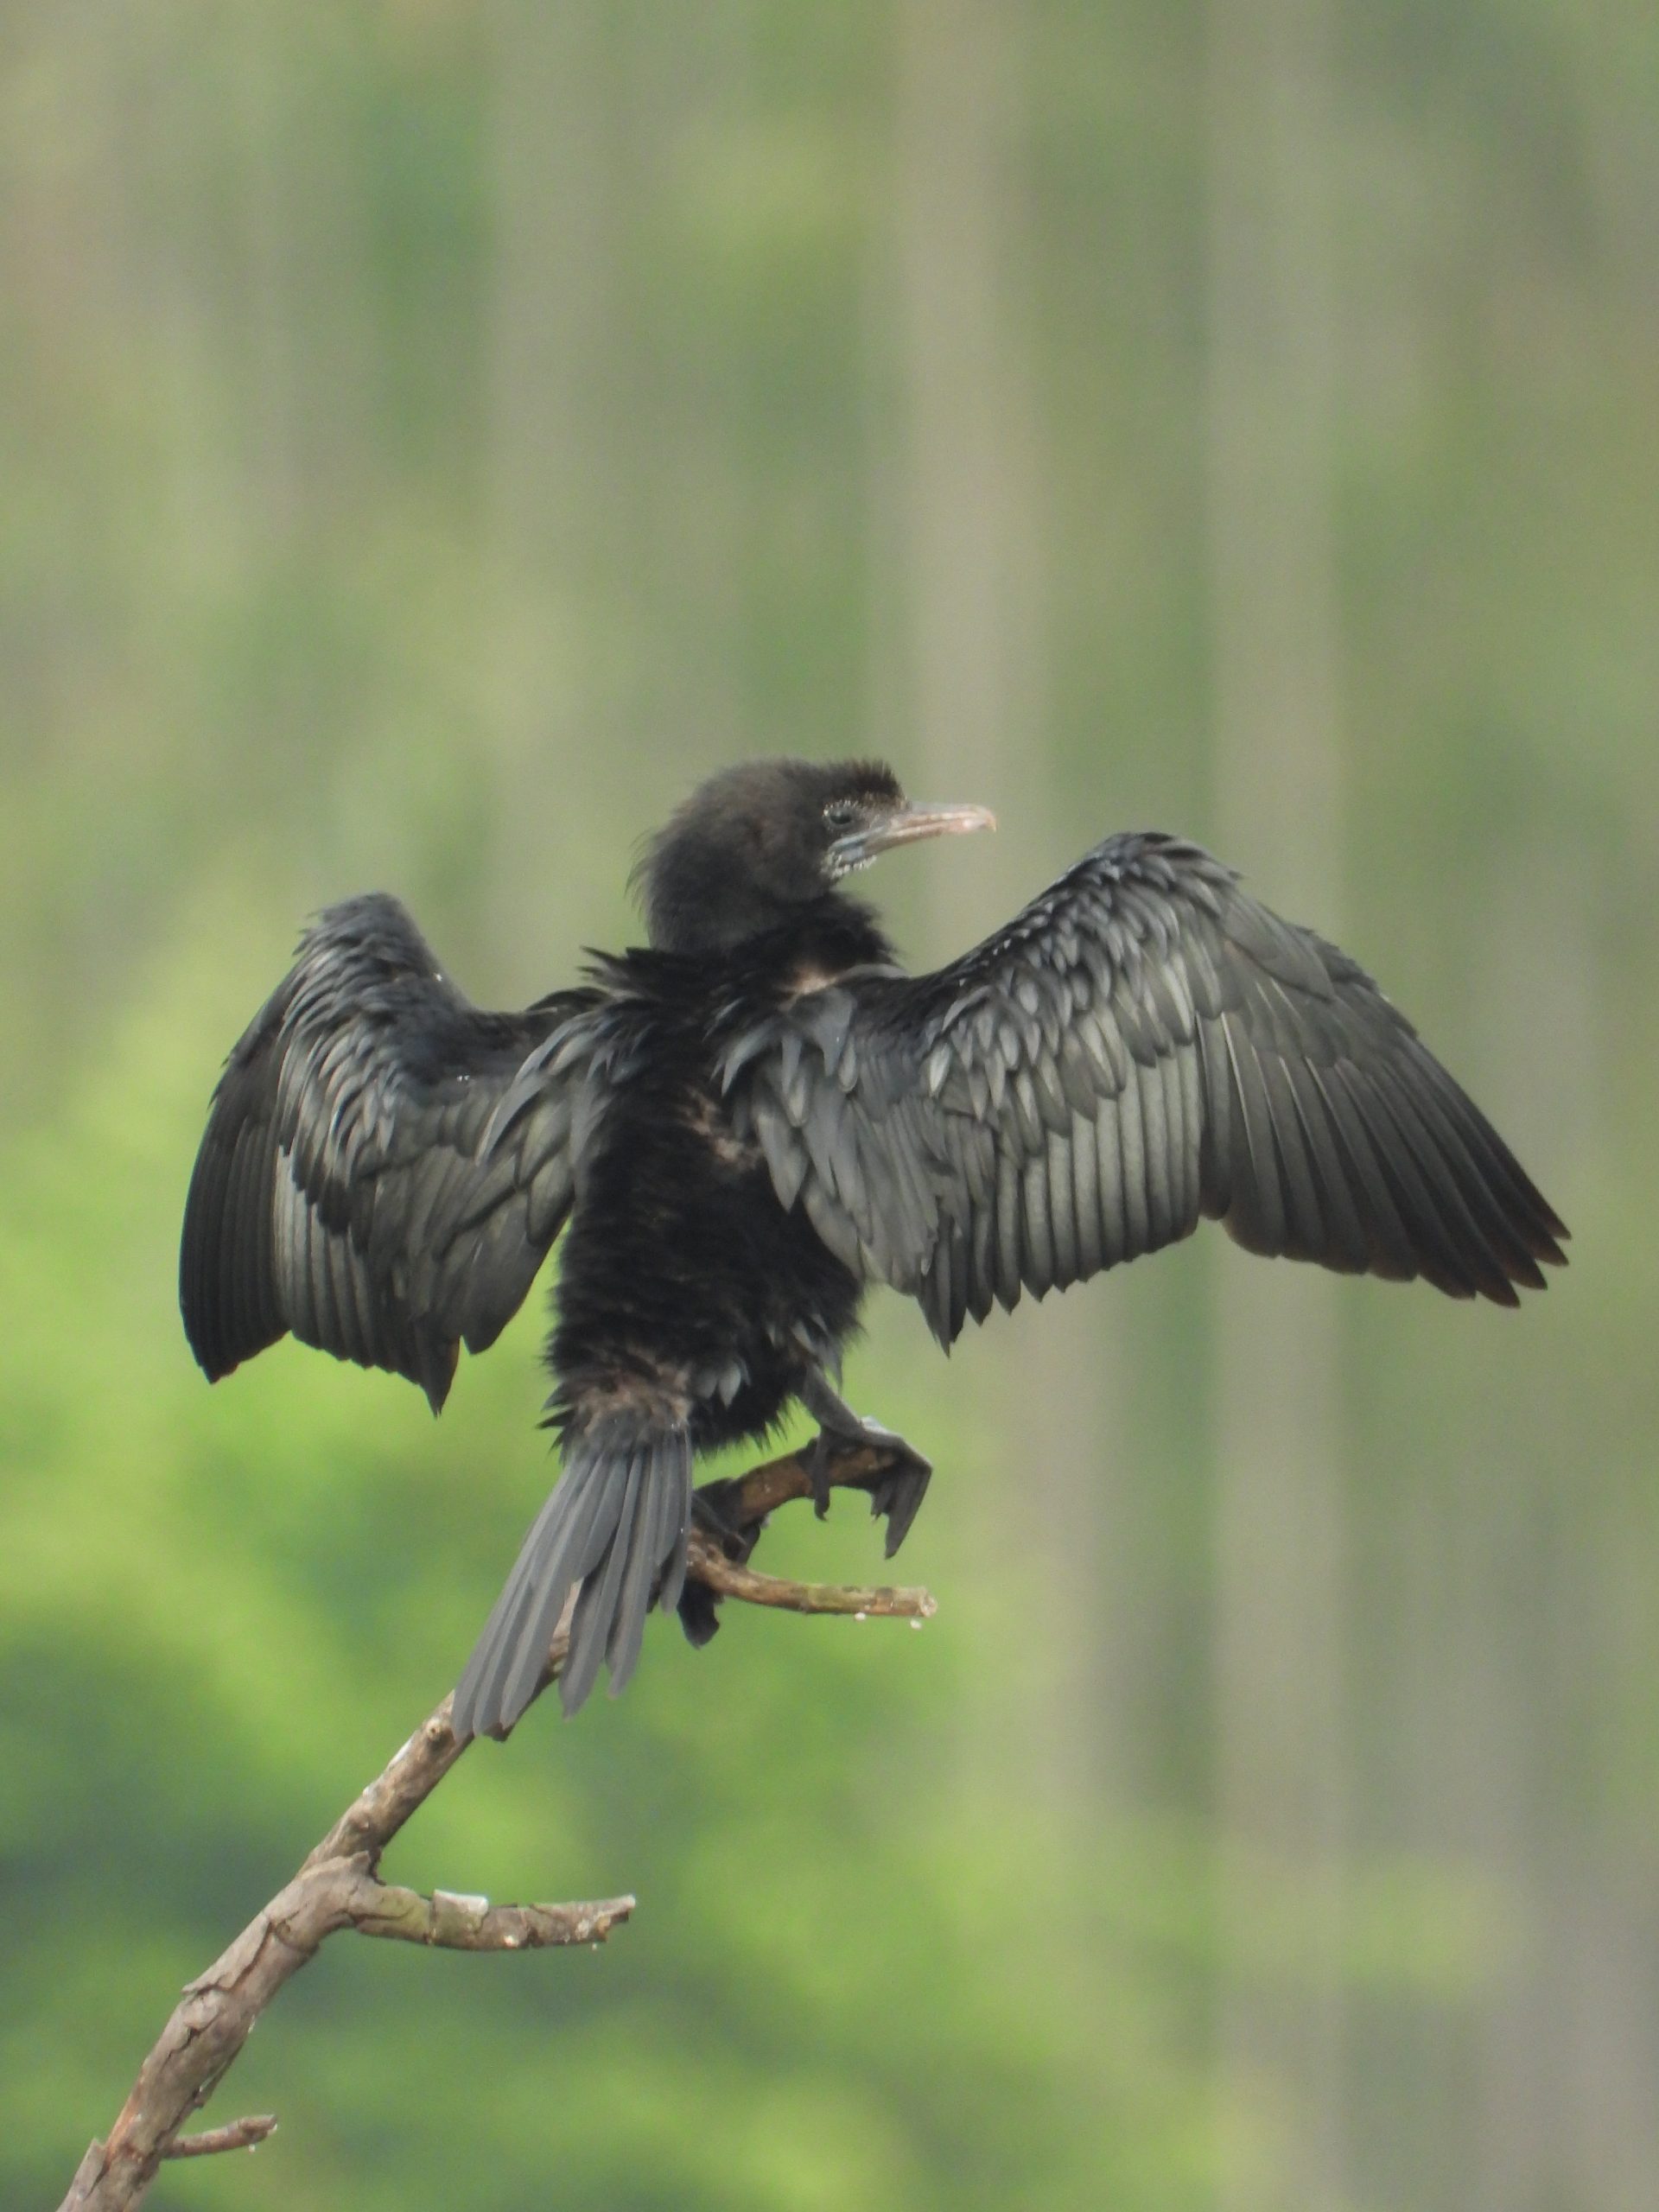 Cormorant with spreaded wings